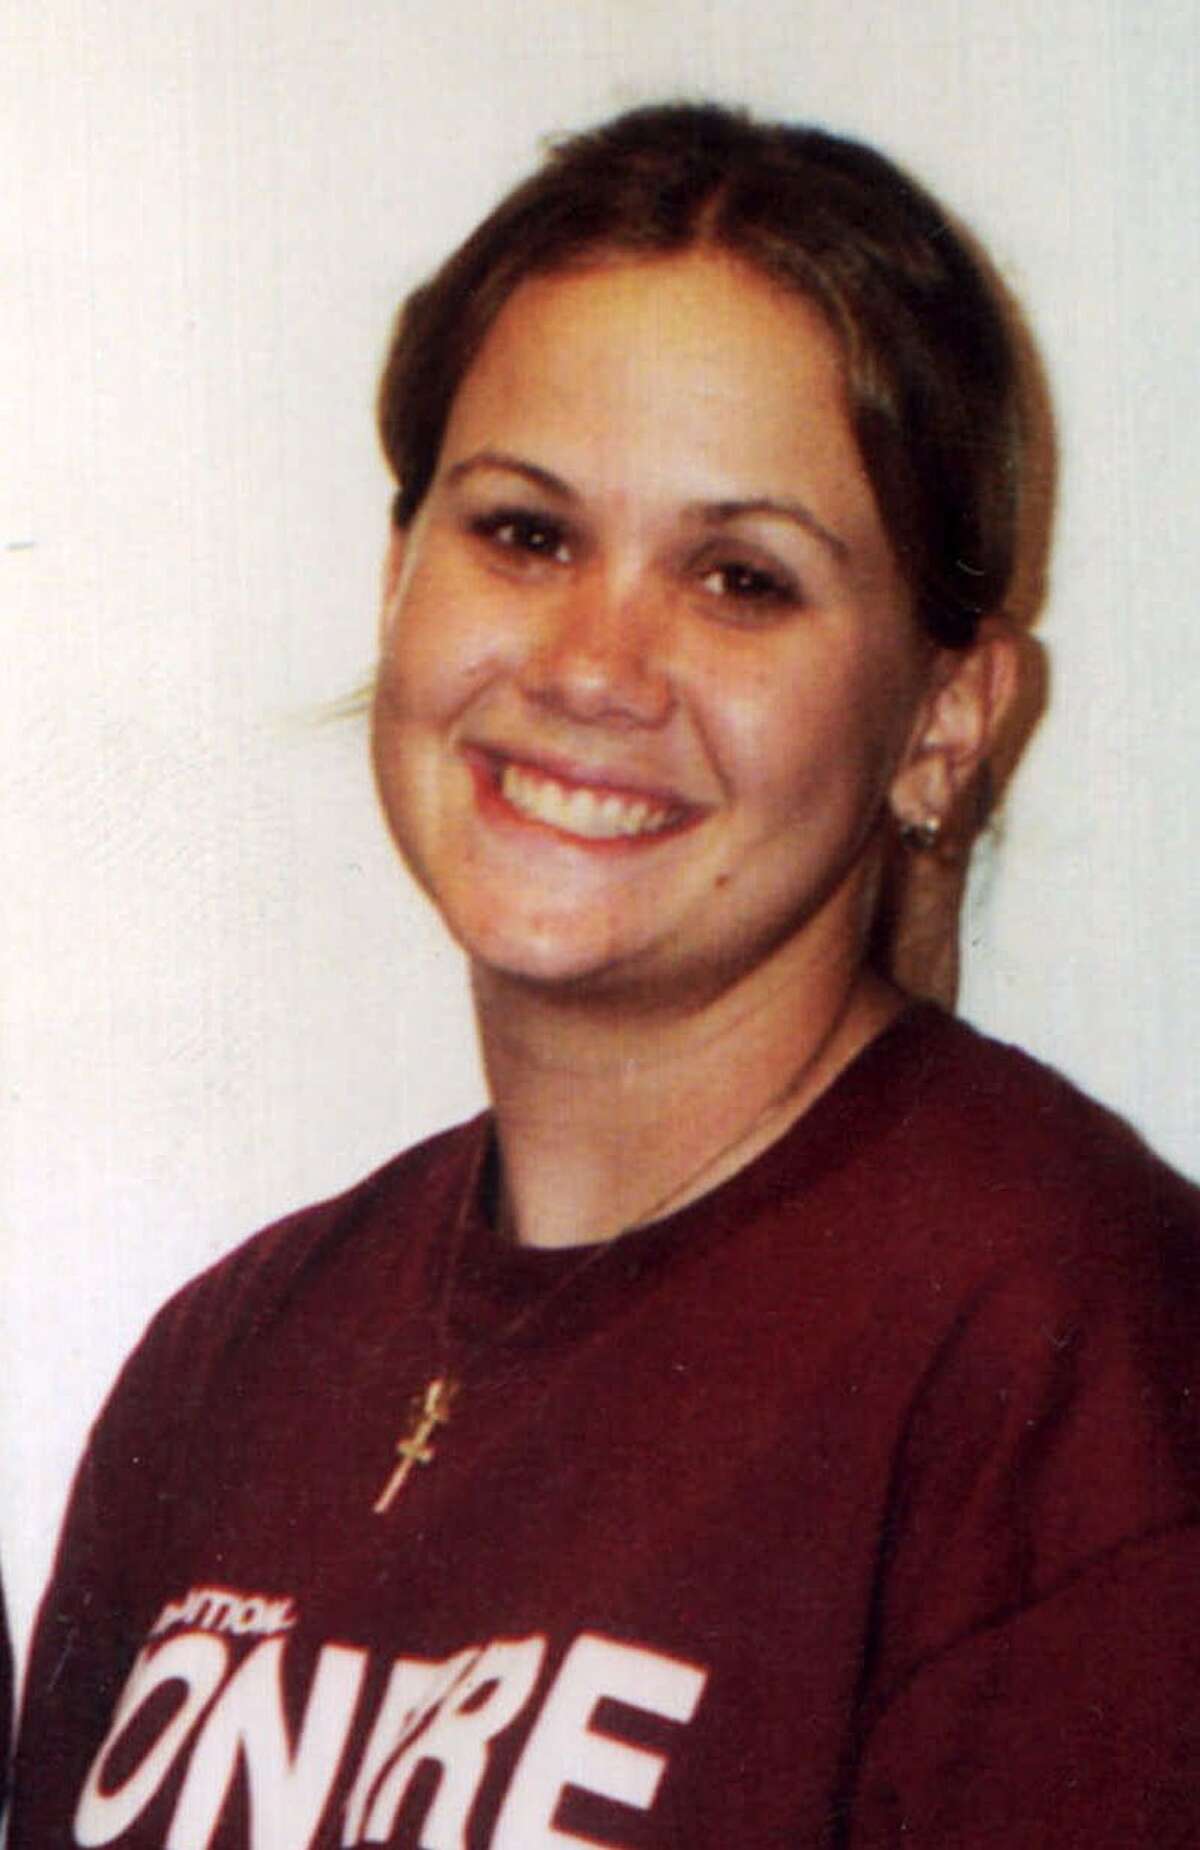 The 12 lives lost in the tragic 1999 Texas A&M bonfire collapse: Miranda Adams, 19, of Sante Fe, Texas, was a sophomore in biomedical sciences student. She would have been a graduate of the Class of 2002.